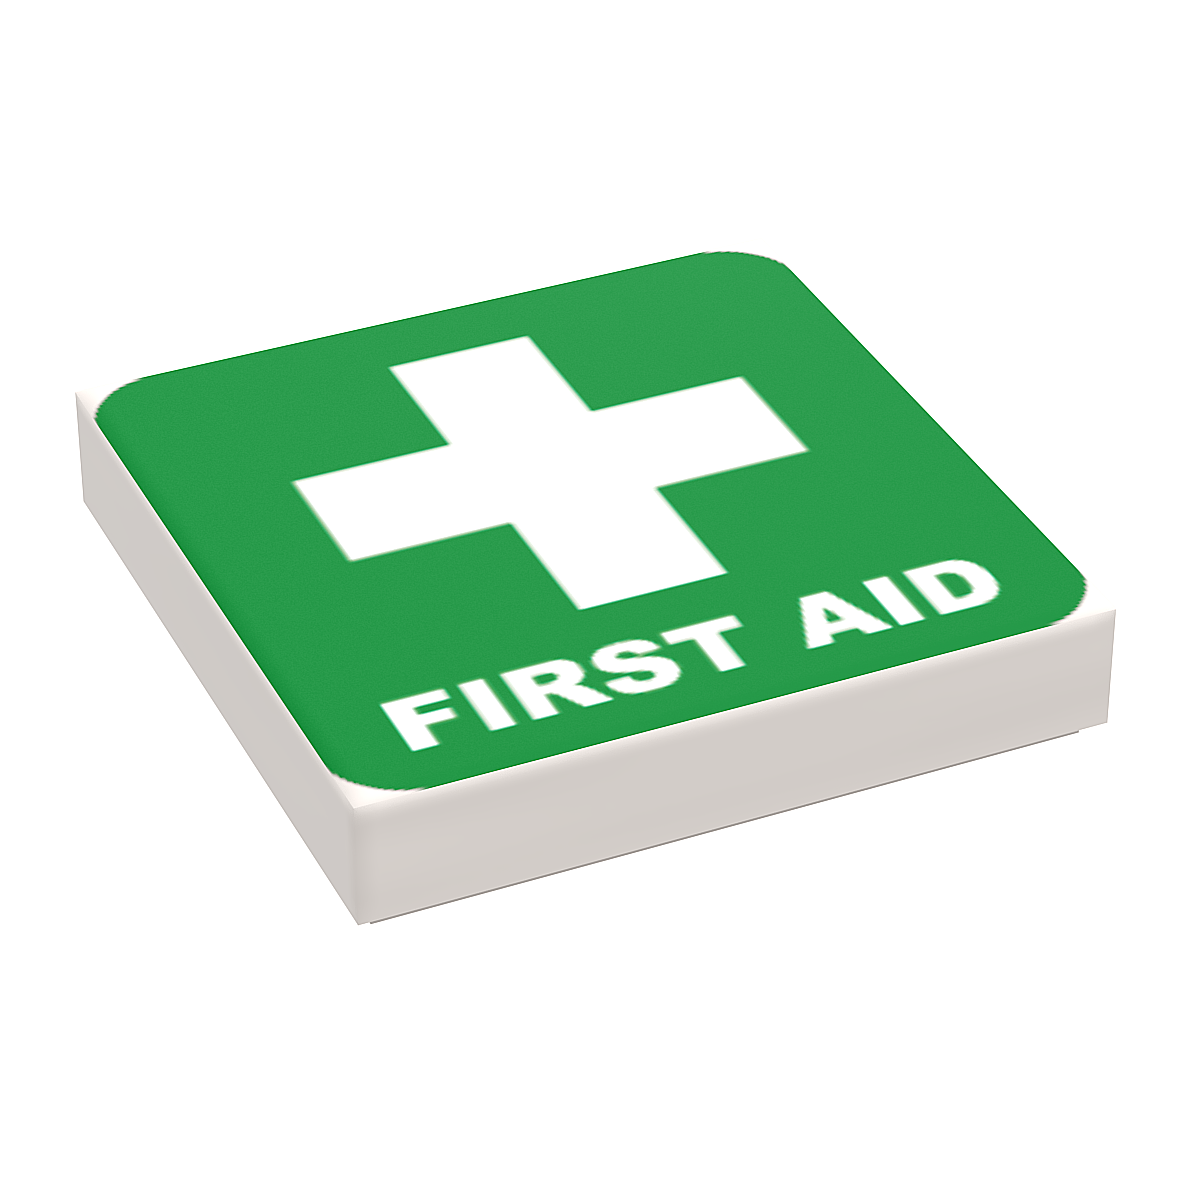 First Aid (Medical) - B3 Customs® Printed 2x2 Tile